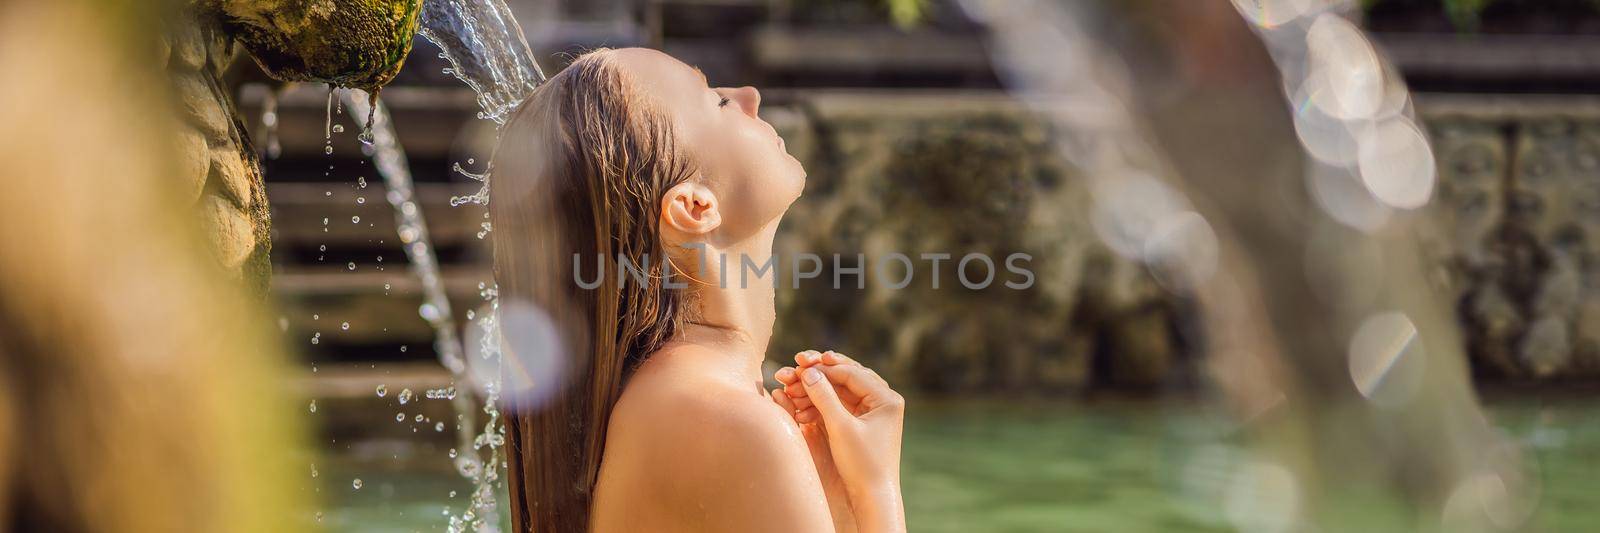 Young woman in hot springs banjar. Thermal water is released from the mouth of statues at a hot springs in Banjar, Bali, Indonesia BANNER, LONG FORMAT by galitskaya